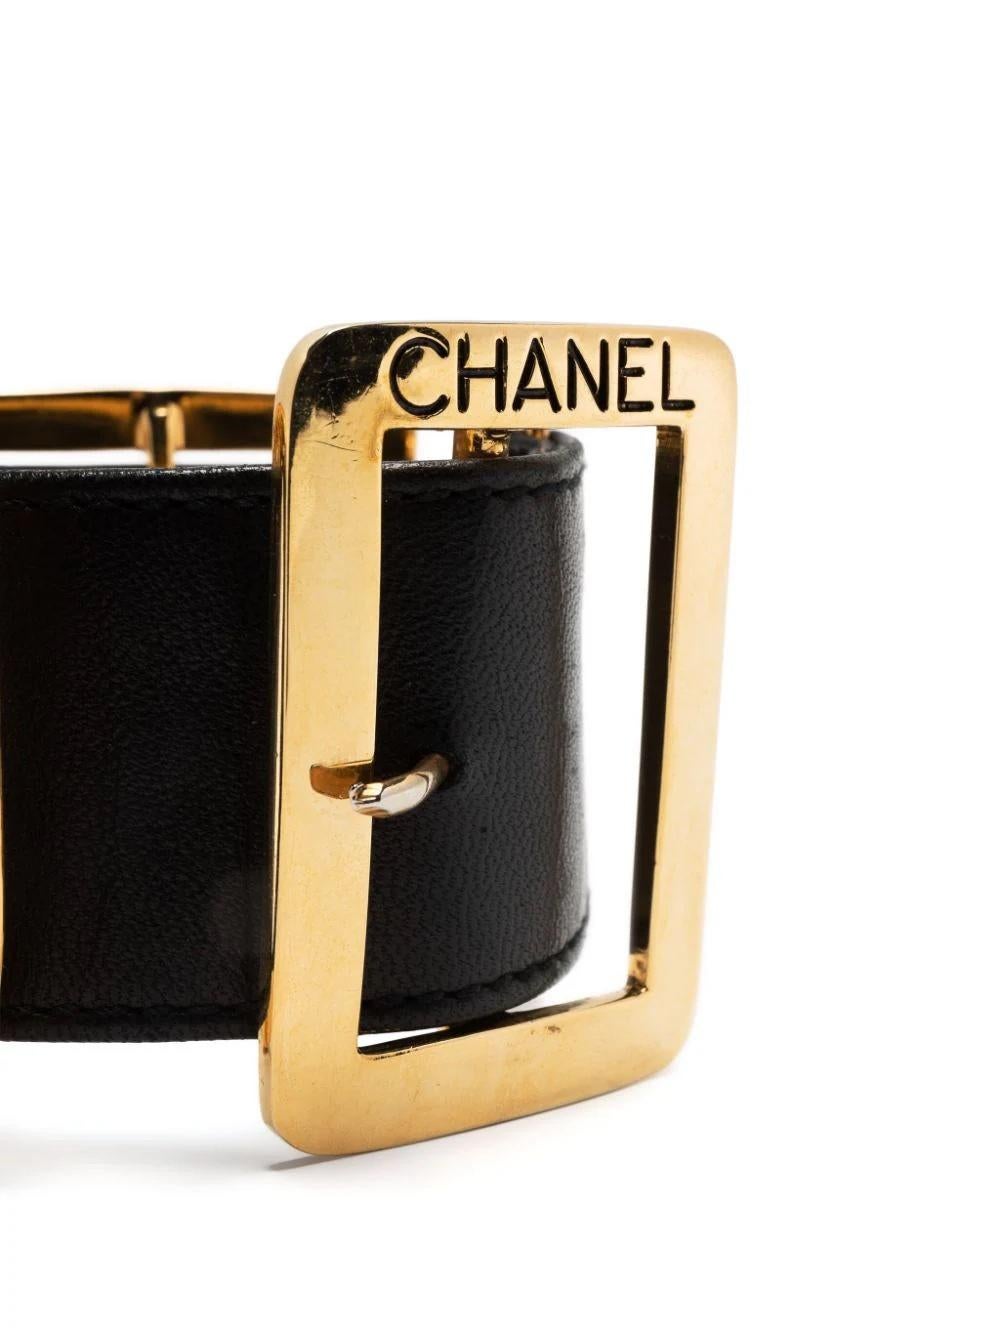 Chanel Buckle Bracelet  In Good Condition For Sale In London, GB